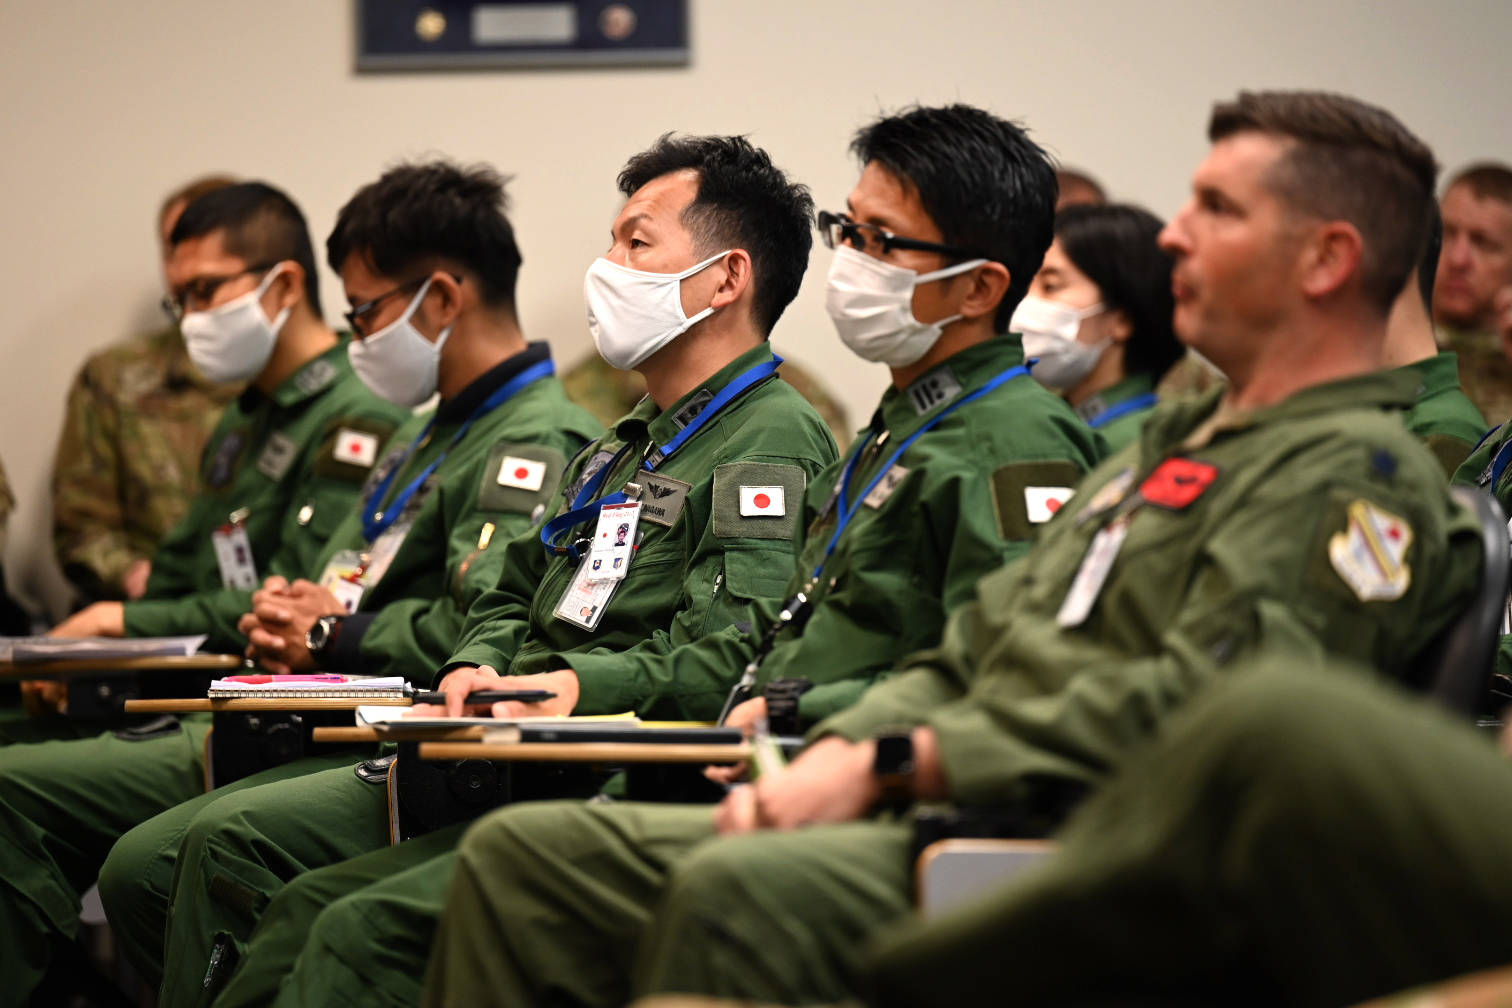 Service members from U.S. Air Force and Japan Air Self-Defense Force listen to the Deployed Forces Commander, Col. Brian Cusson, to kick-off RED FLAG-Alaska 21-2 at Joint Base Elmendorf-Richardson, Alaska, June 10, 2021. (Sheila deVera / U.S. Air Force)